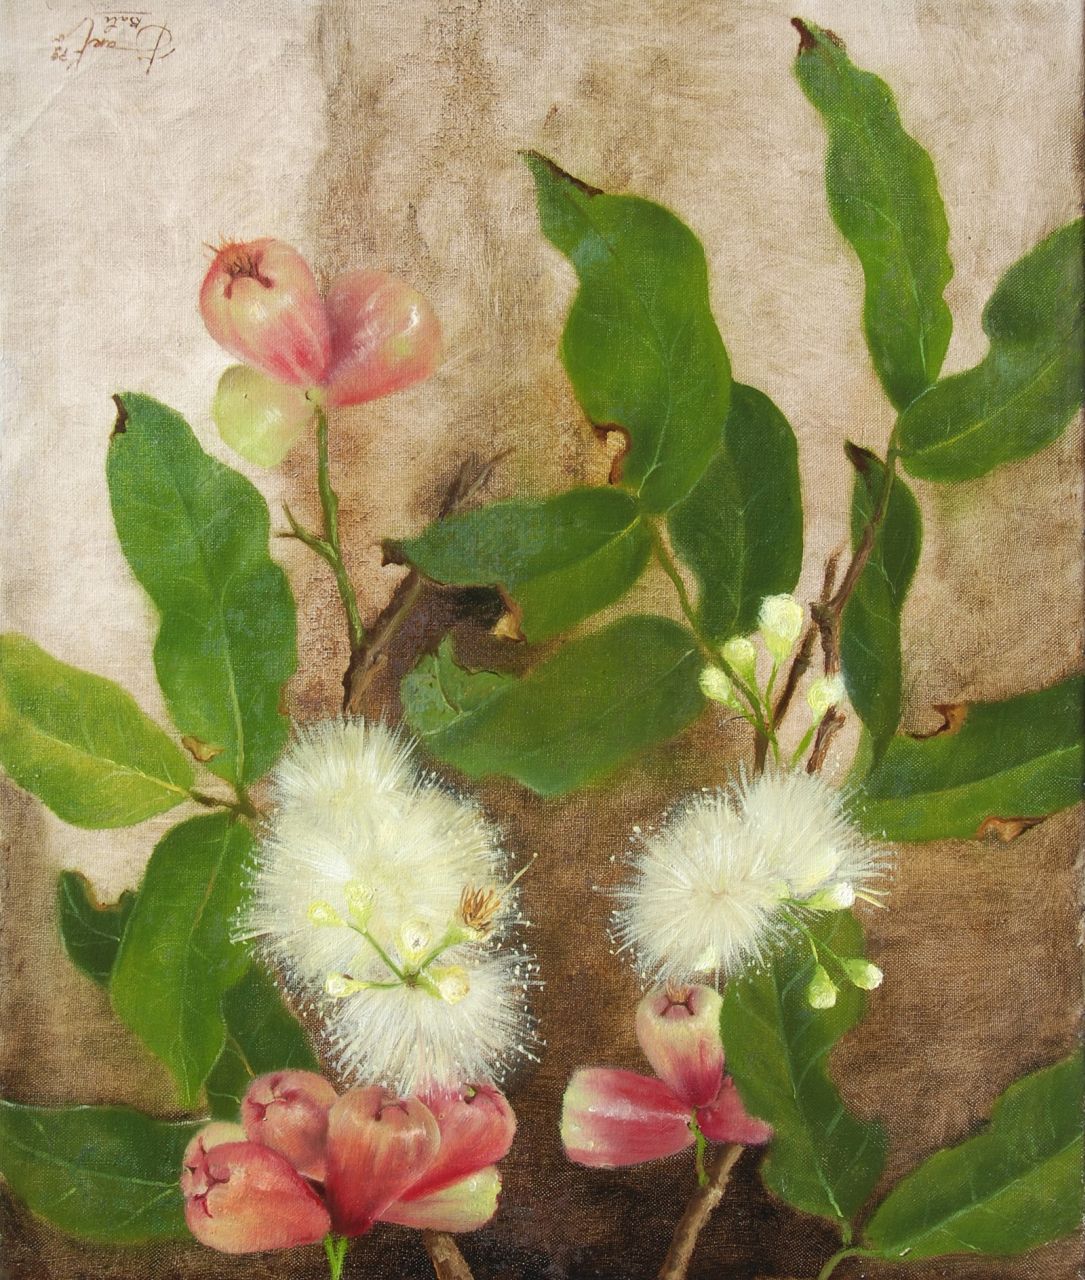 Jarto   | Jarto, Silk tree in bloom, oil on canvas 60.3 x 50.2 cm, signed l.r. and dated ' 79